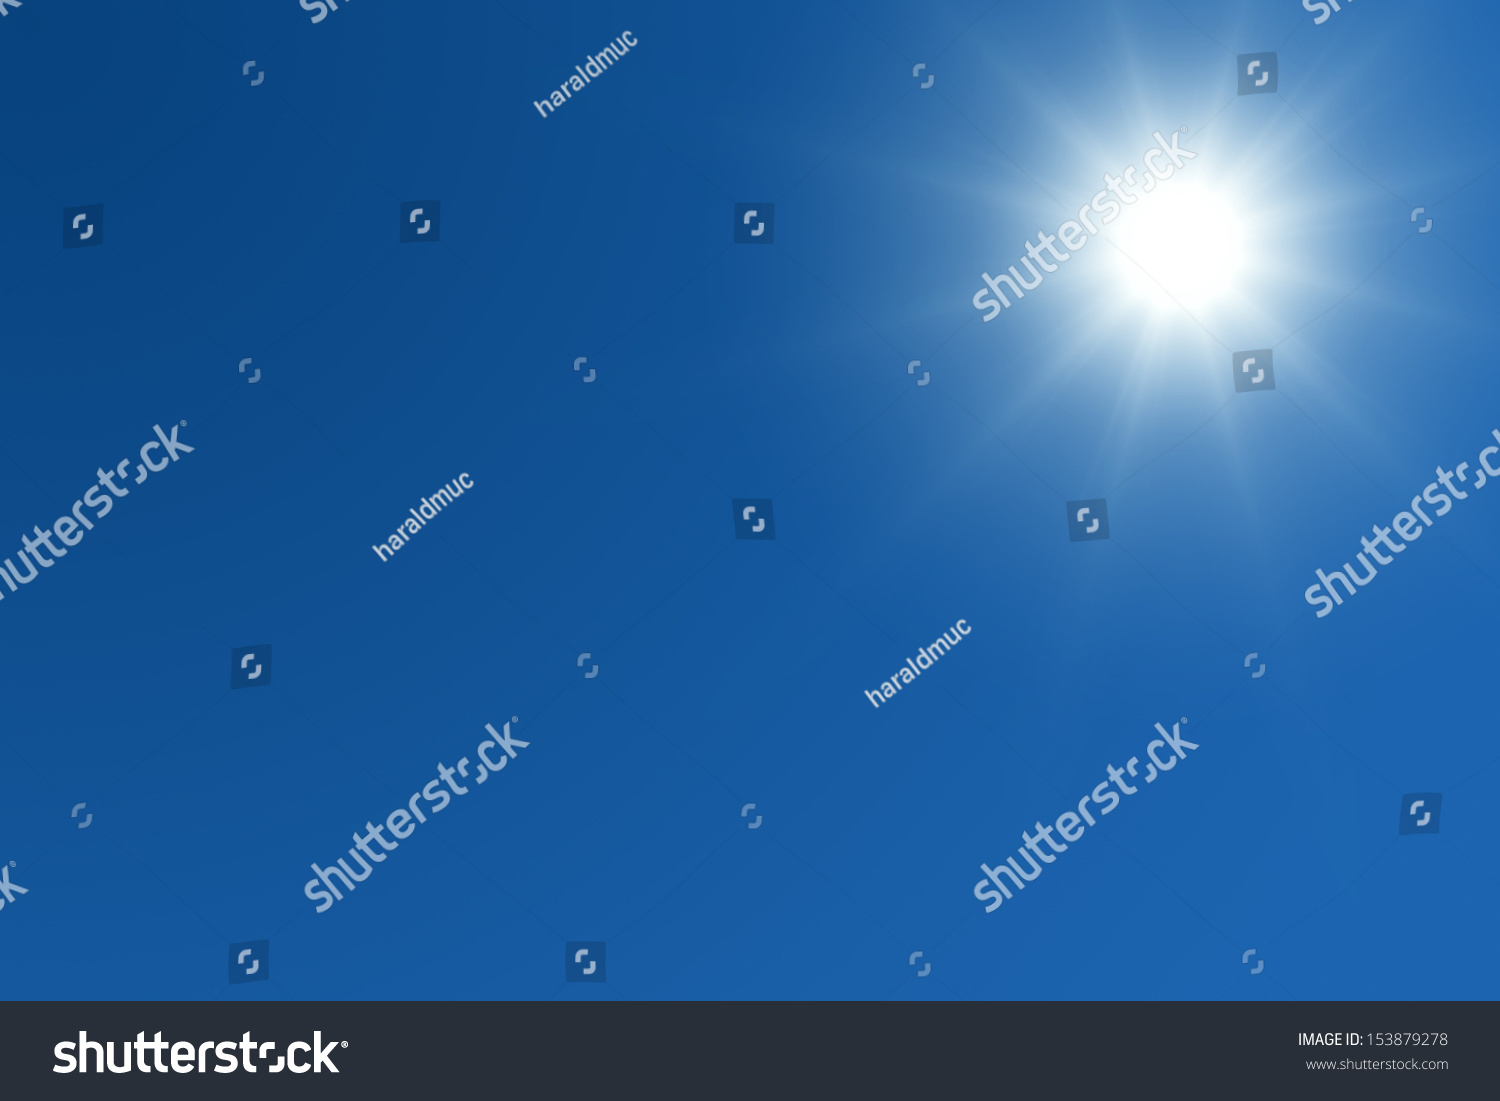 Bright sun with text space #153879278